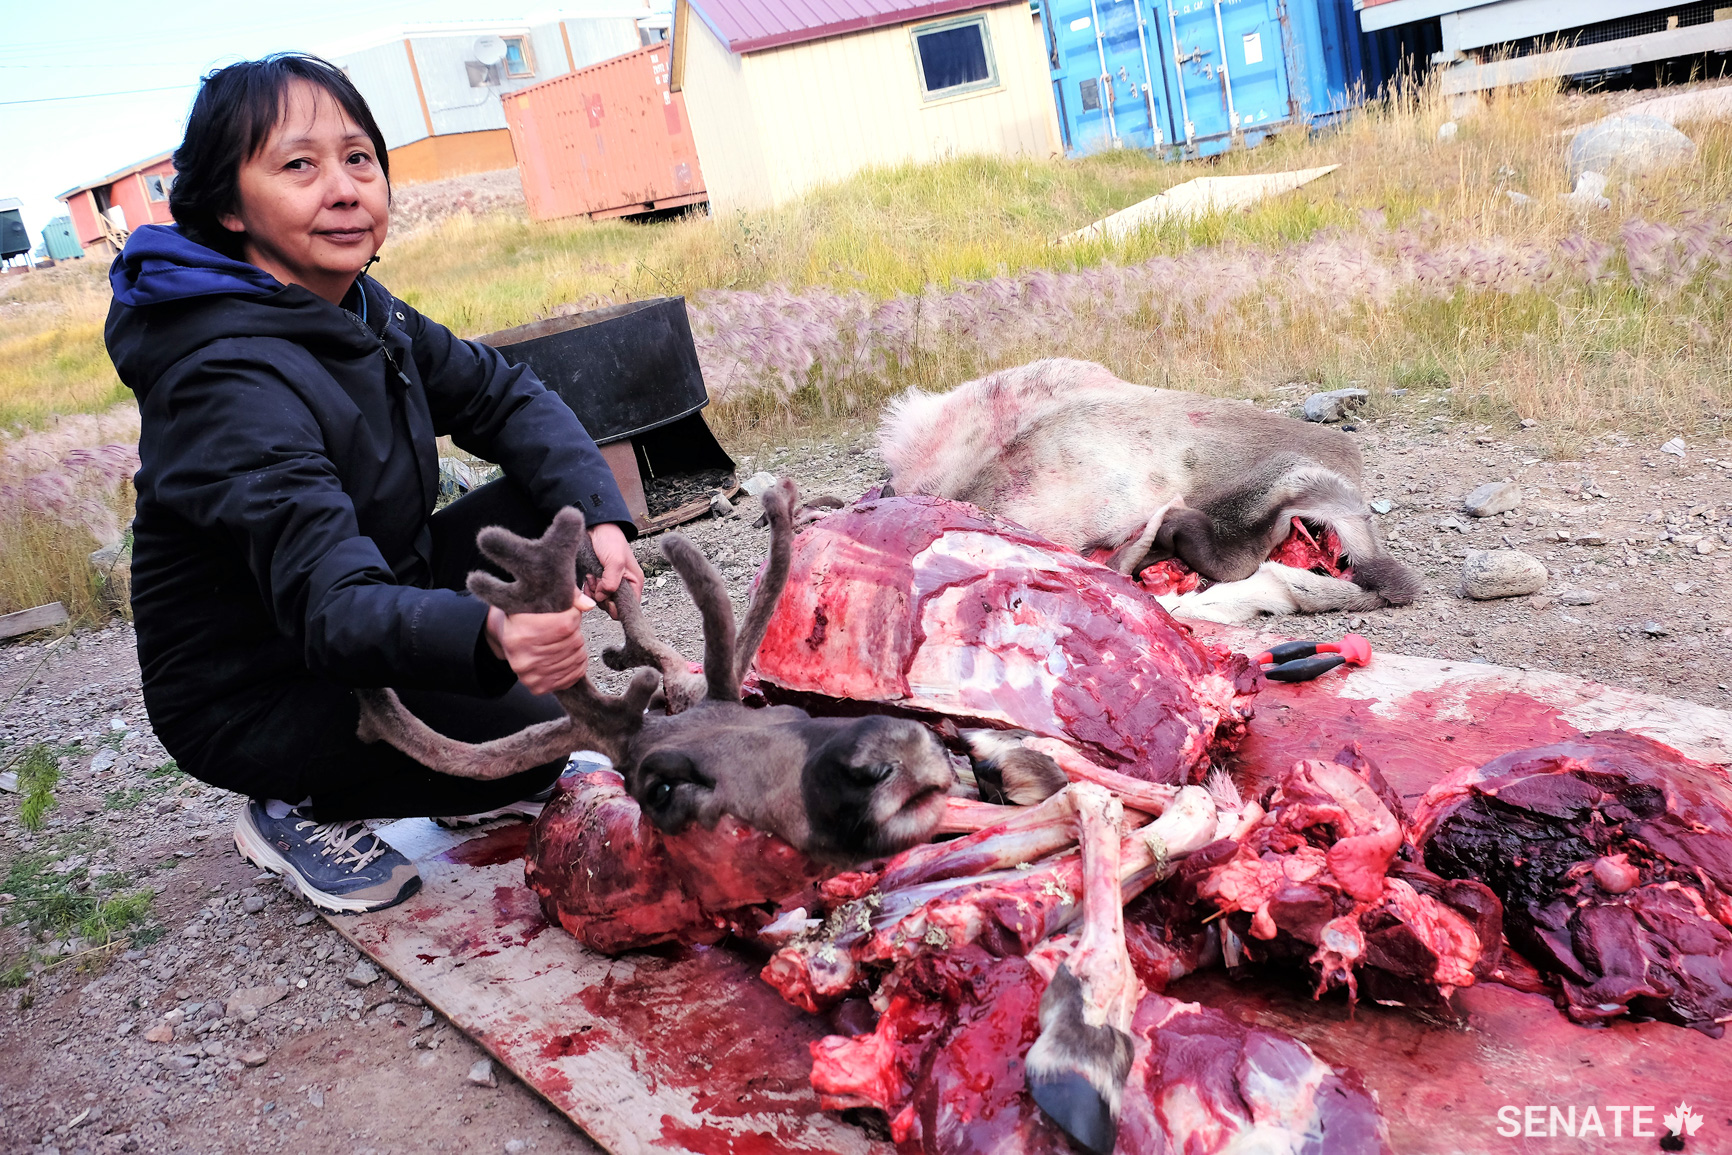 Suzanne Niuqtuq sits outside her home in Baker Lake, Nunavut, after returning from a successful caribou hunt with her family. Caribou is a common type of country food in Baker Lake and is often shared with the community. The meat from this caribou will last the family about two months, Ms. Niuqtuq said. Food insecurity came up several times during the Arctic committee’s discussions with northerners.